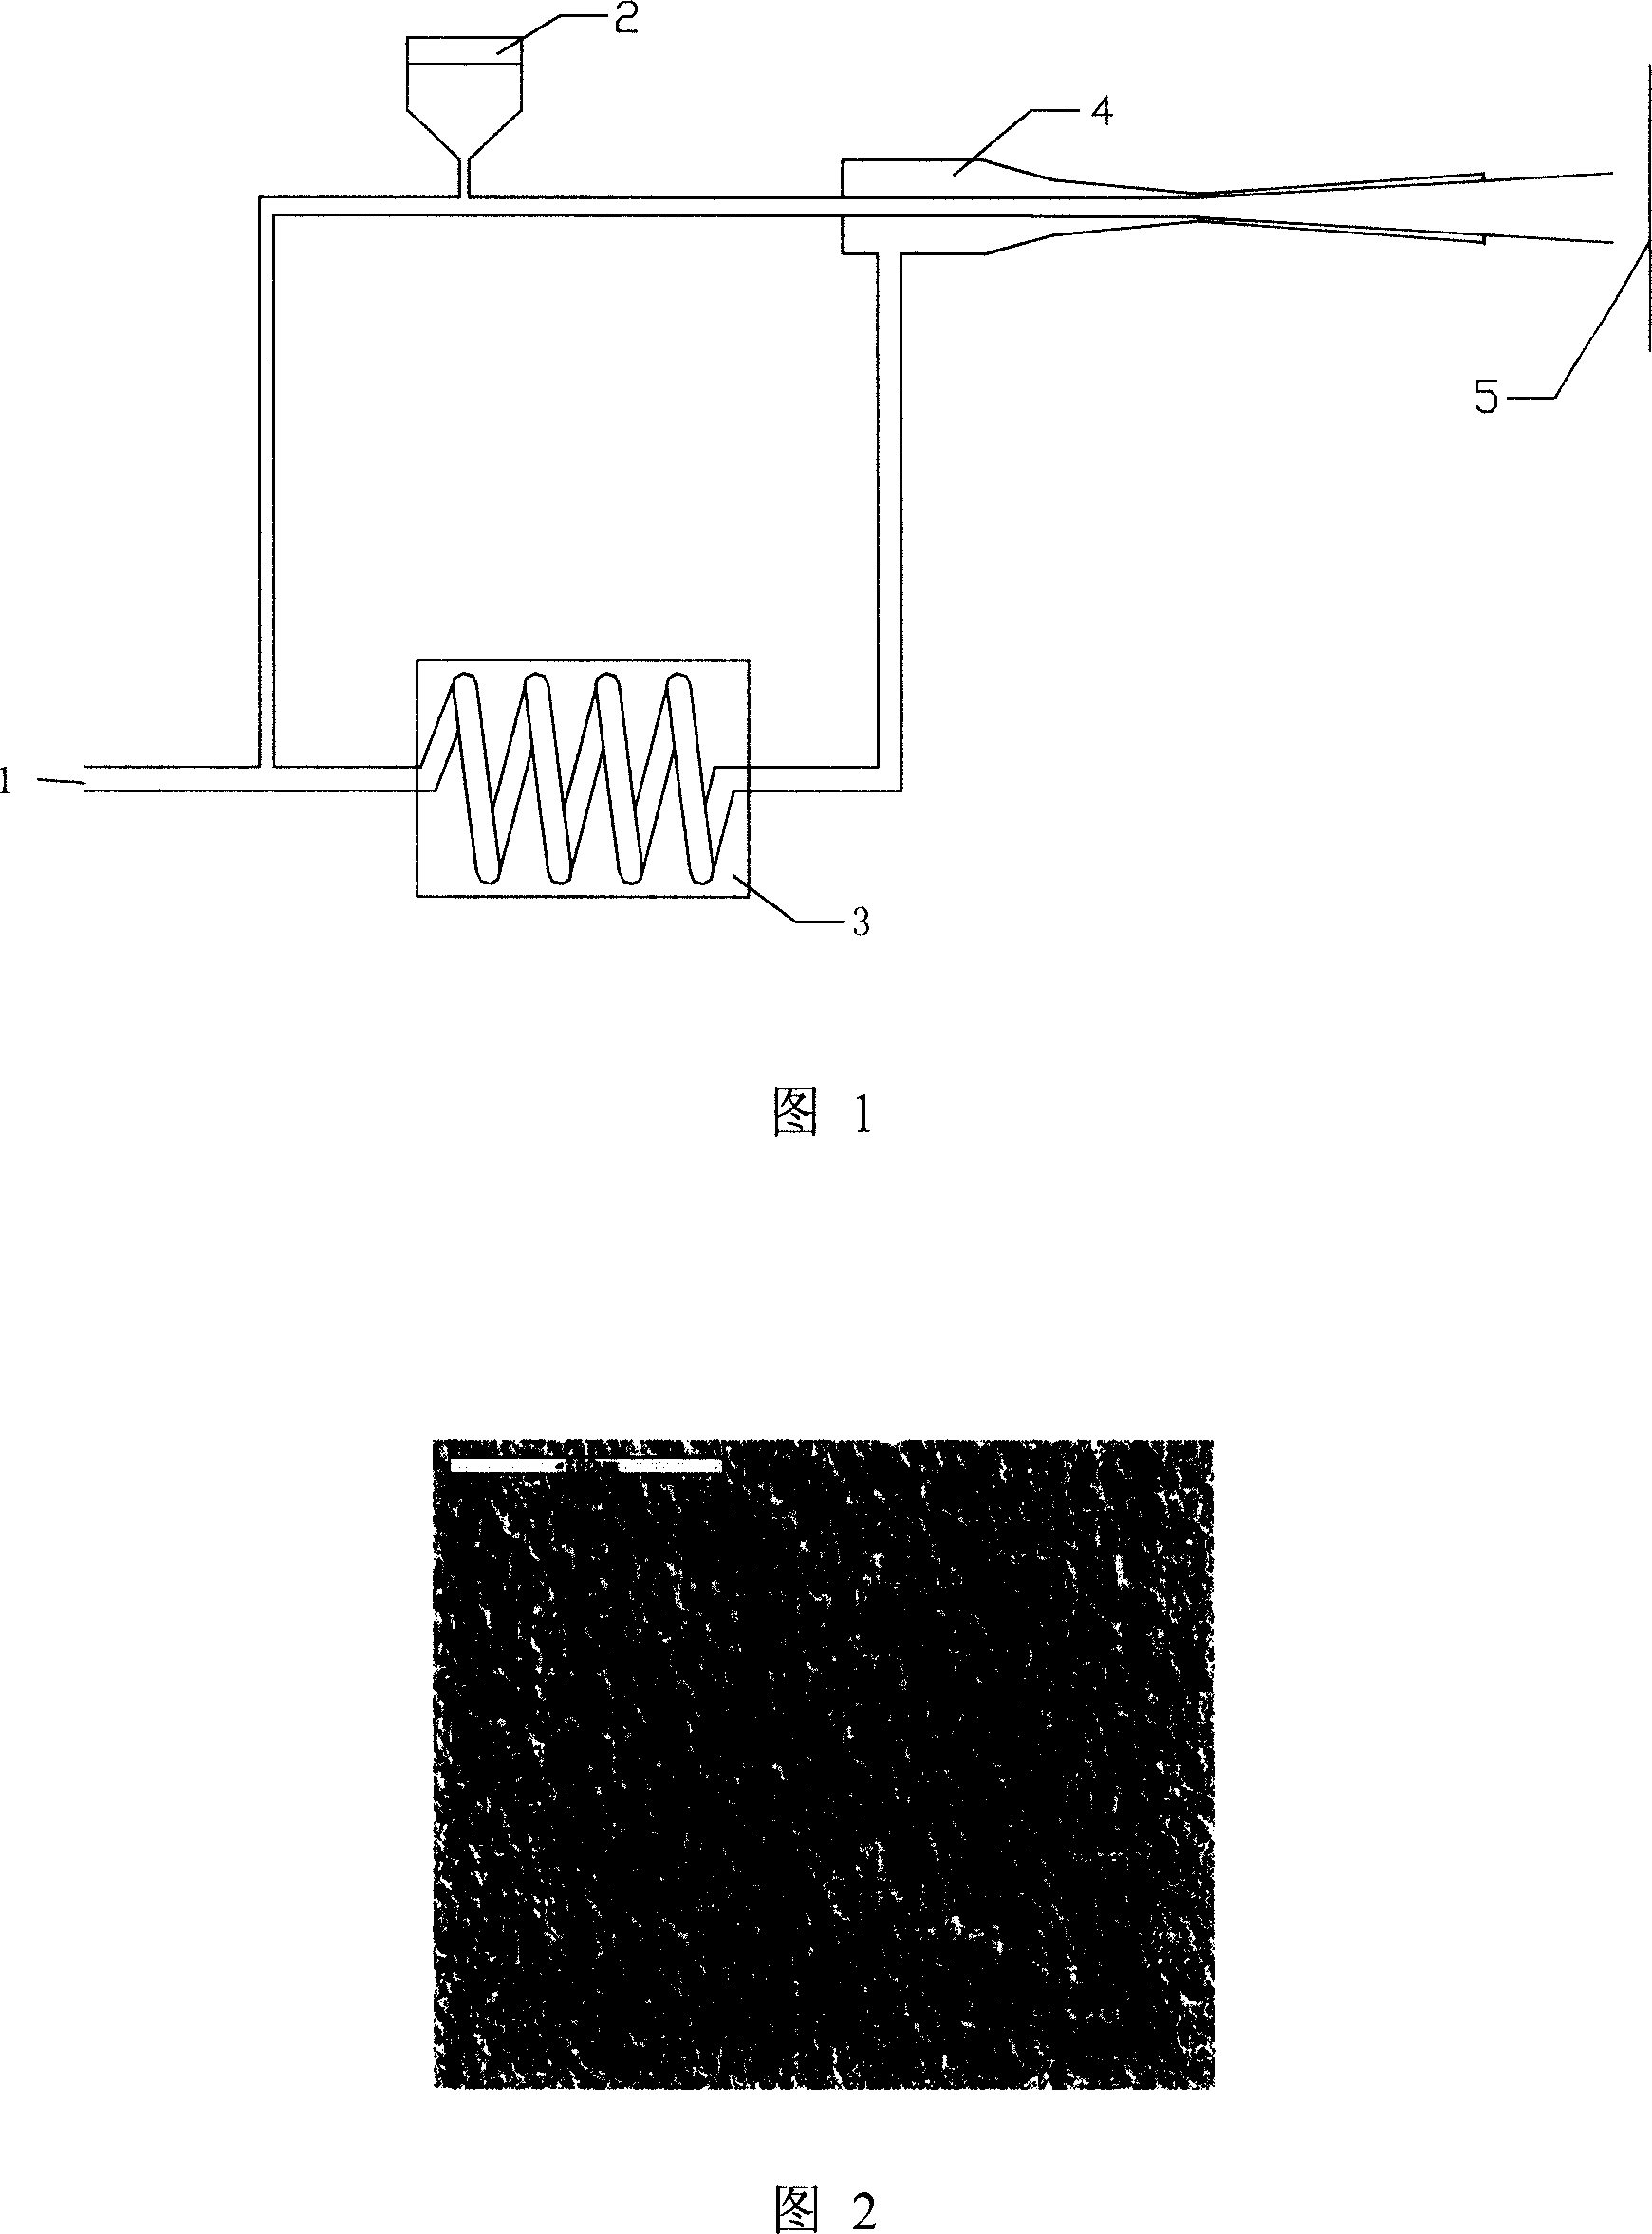 Method for coarsening surface by erosion of hard grains in high speed